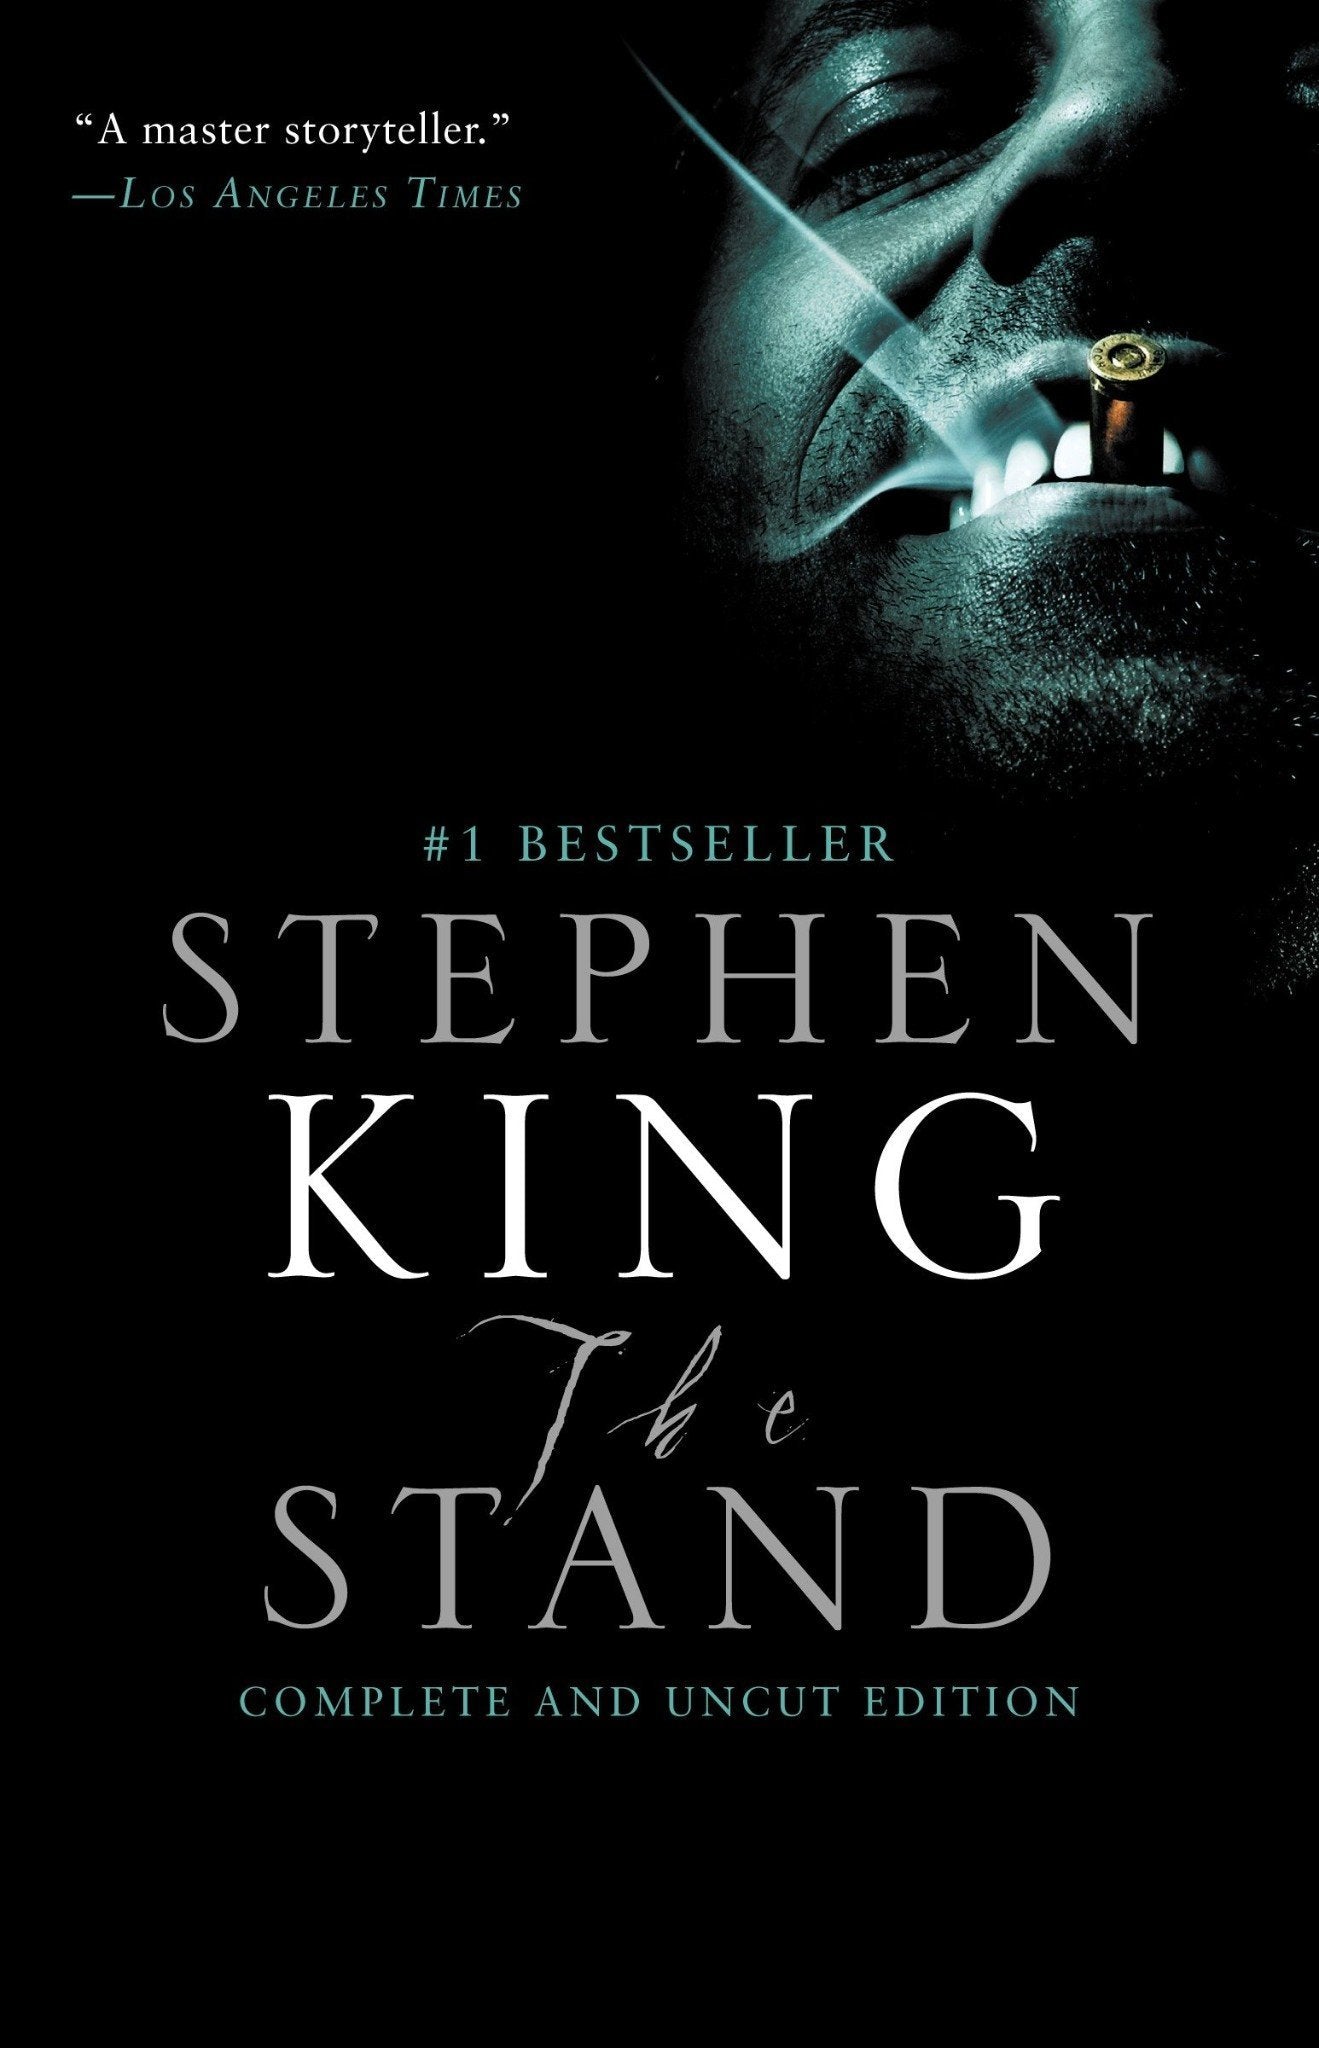 The Stand by Stephen King (Paperback) - Complete and Uncut Edition - LV'S Global Media